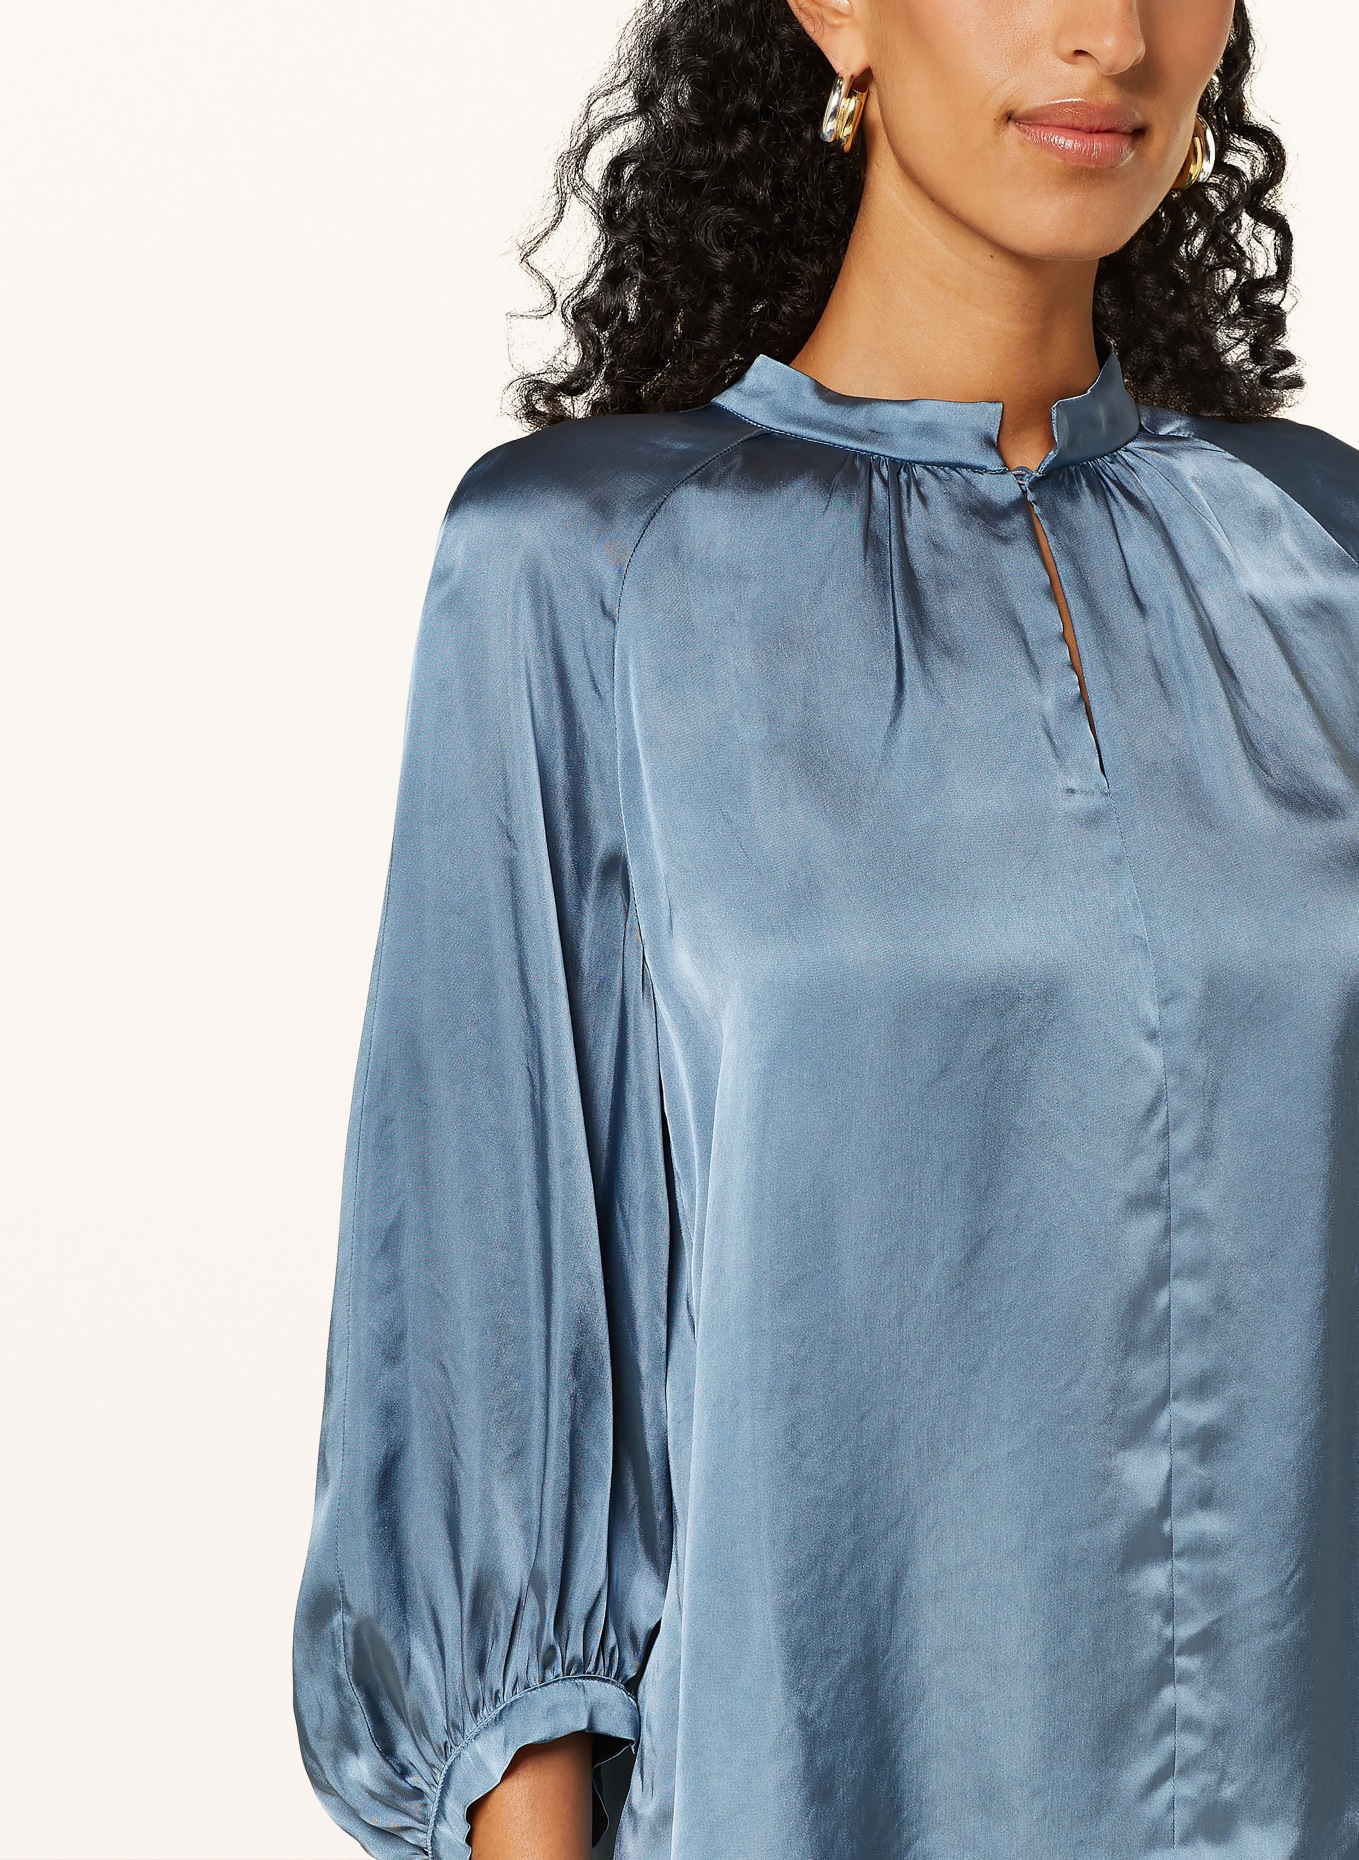 LUISA CERANO Shirt blouse made of satin with 3/4 sleeves, Color: BLUE GRAY (Image 4)